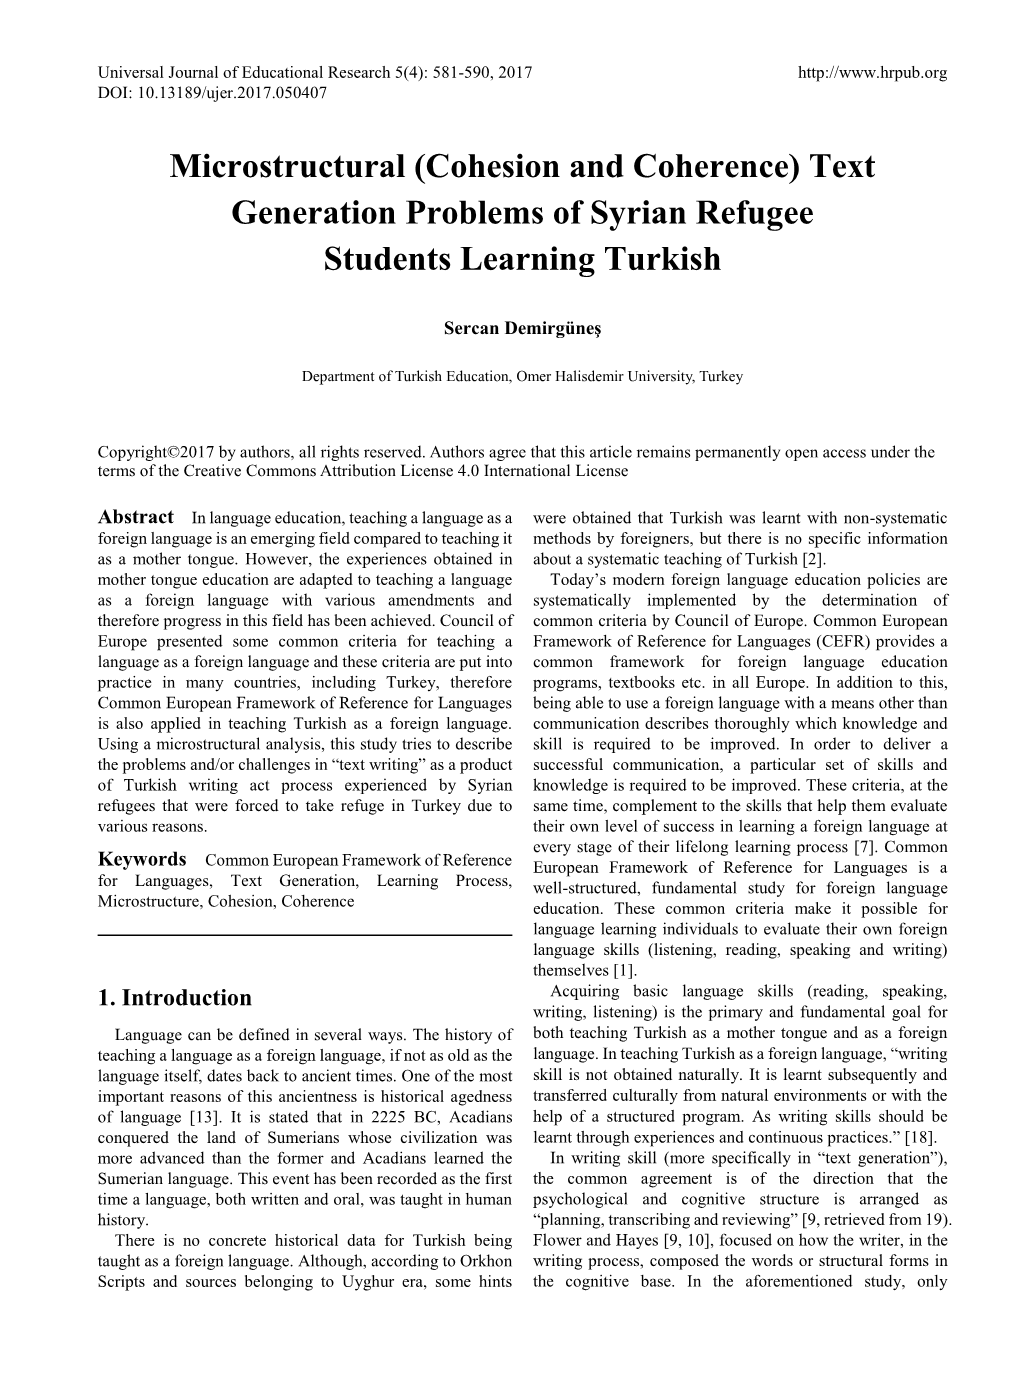 Microstructural (Cohesion and Coherence) Text Generation Problems of Syrian Refugee Students Learning Turkish